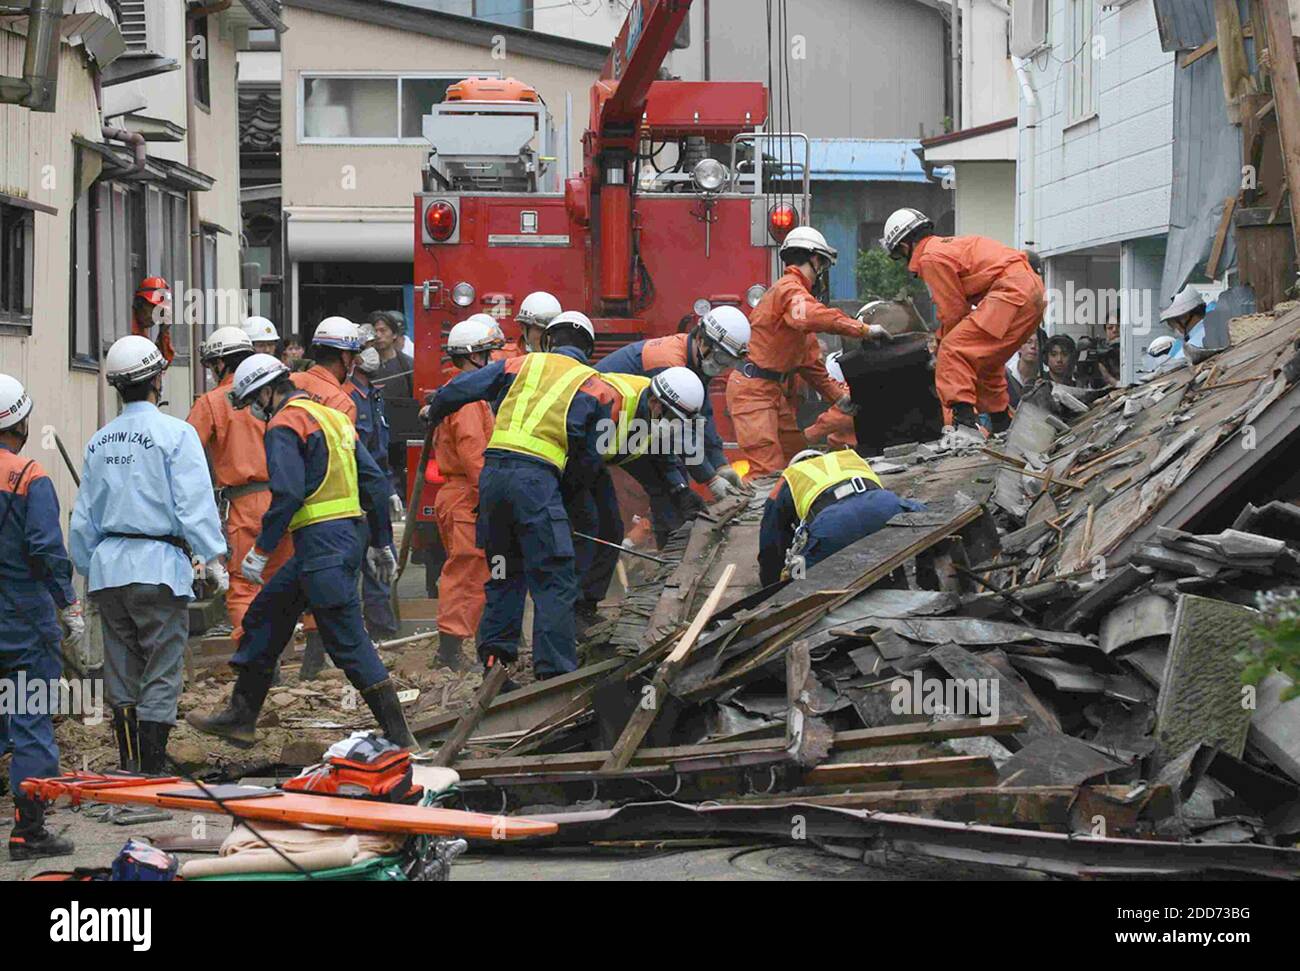 NO FILM, NO VIDEO, NO TV, NO DOCUMENTARY - Rescue workers sift through rubble on Tuesday, July 17, 2007, in Niigata, Japan. An earthquake hit the the area on Monday morning. Photo by Yomiuri Shimbun/MCT/ABACAPRESS.COM Stock Photo